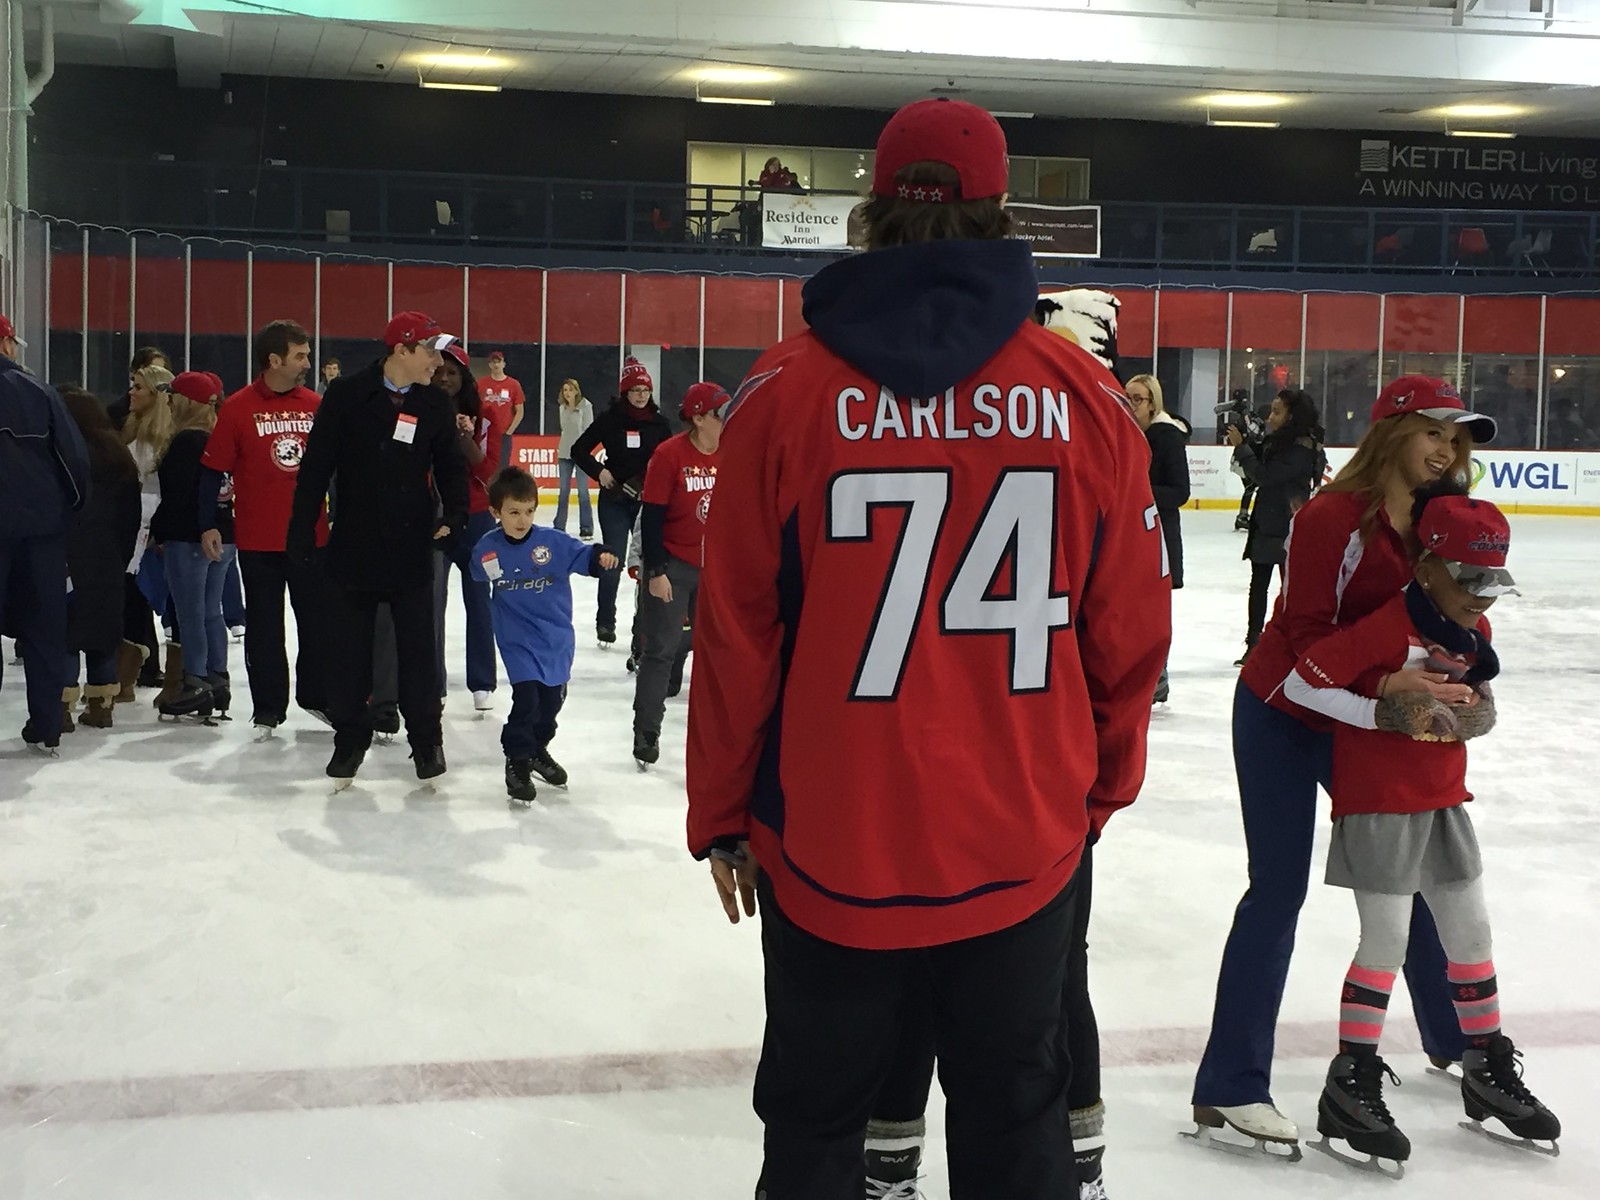 2016_T4T_Skate with Washington Capitals 4